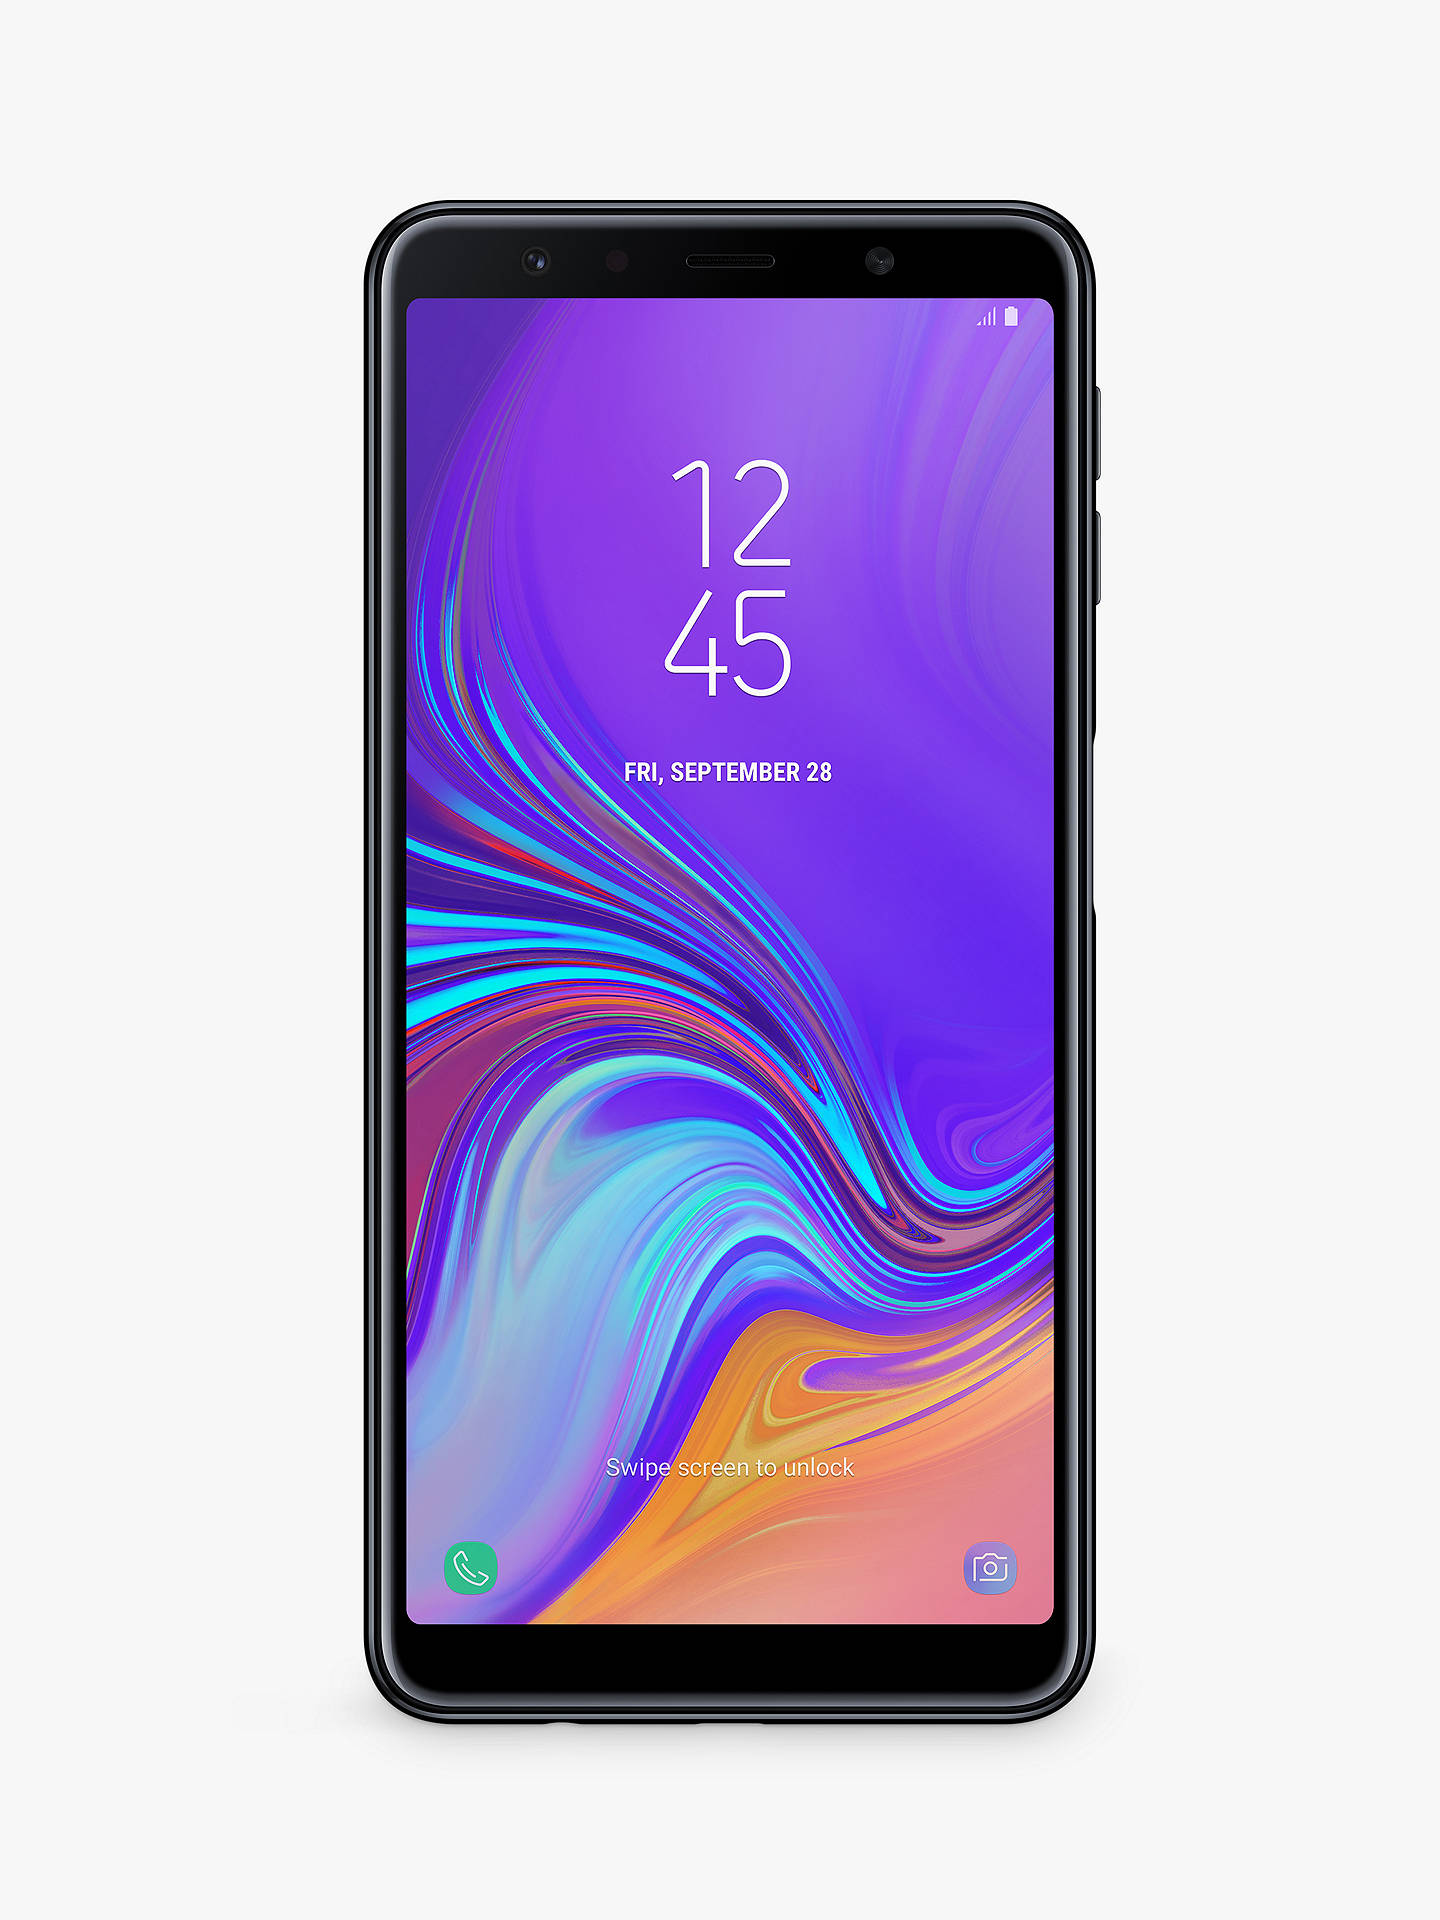 Samsung Galaxy A7 Smartphone, Android, 6”, 4G LTE, SIM Free, 64GB at